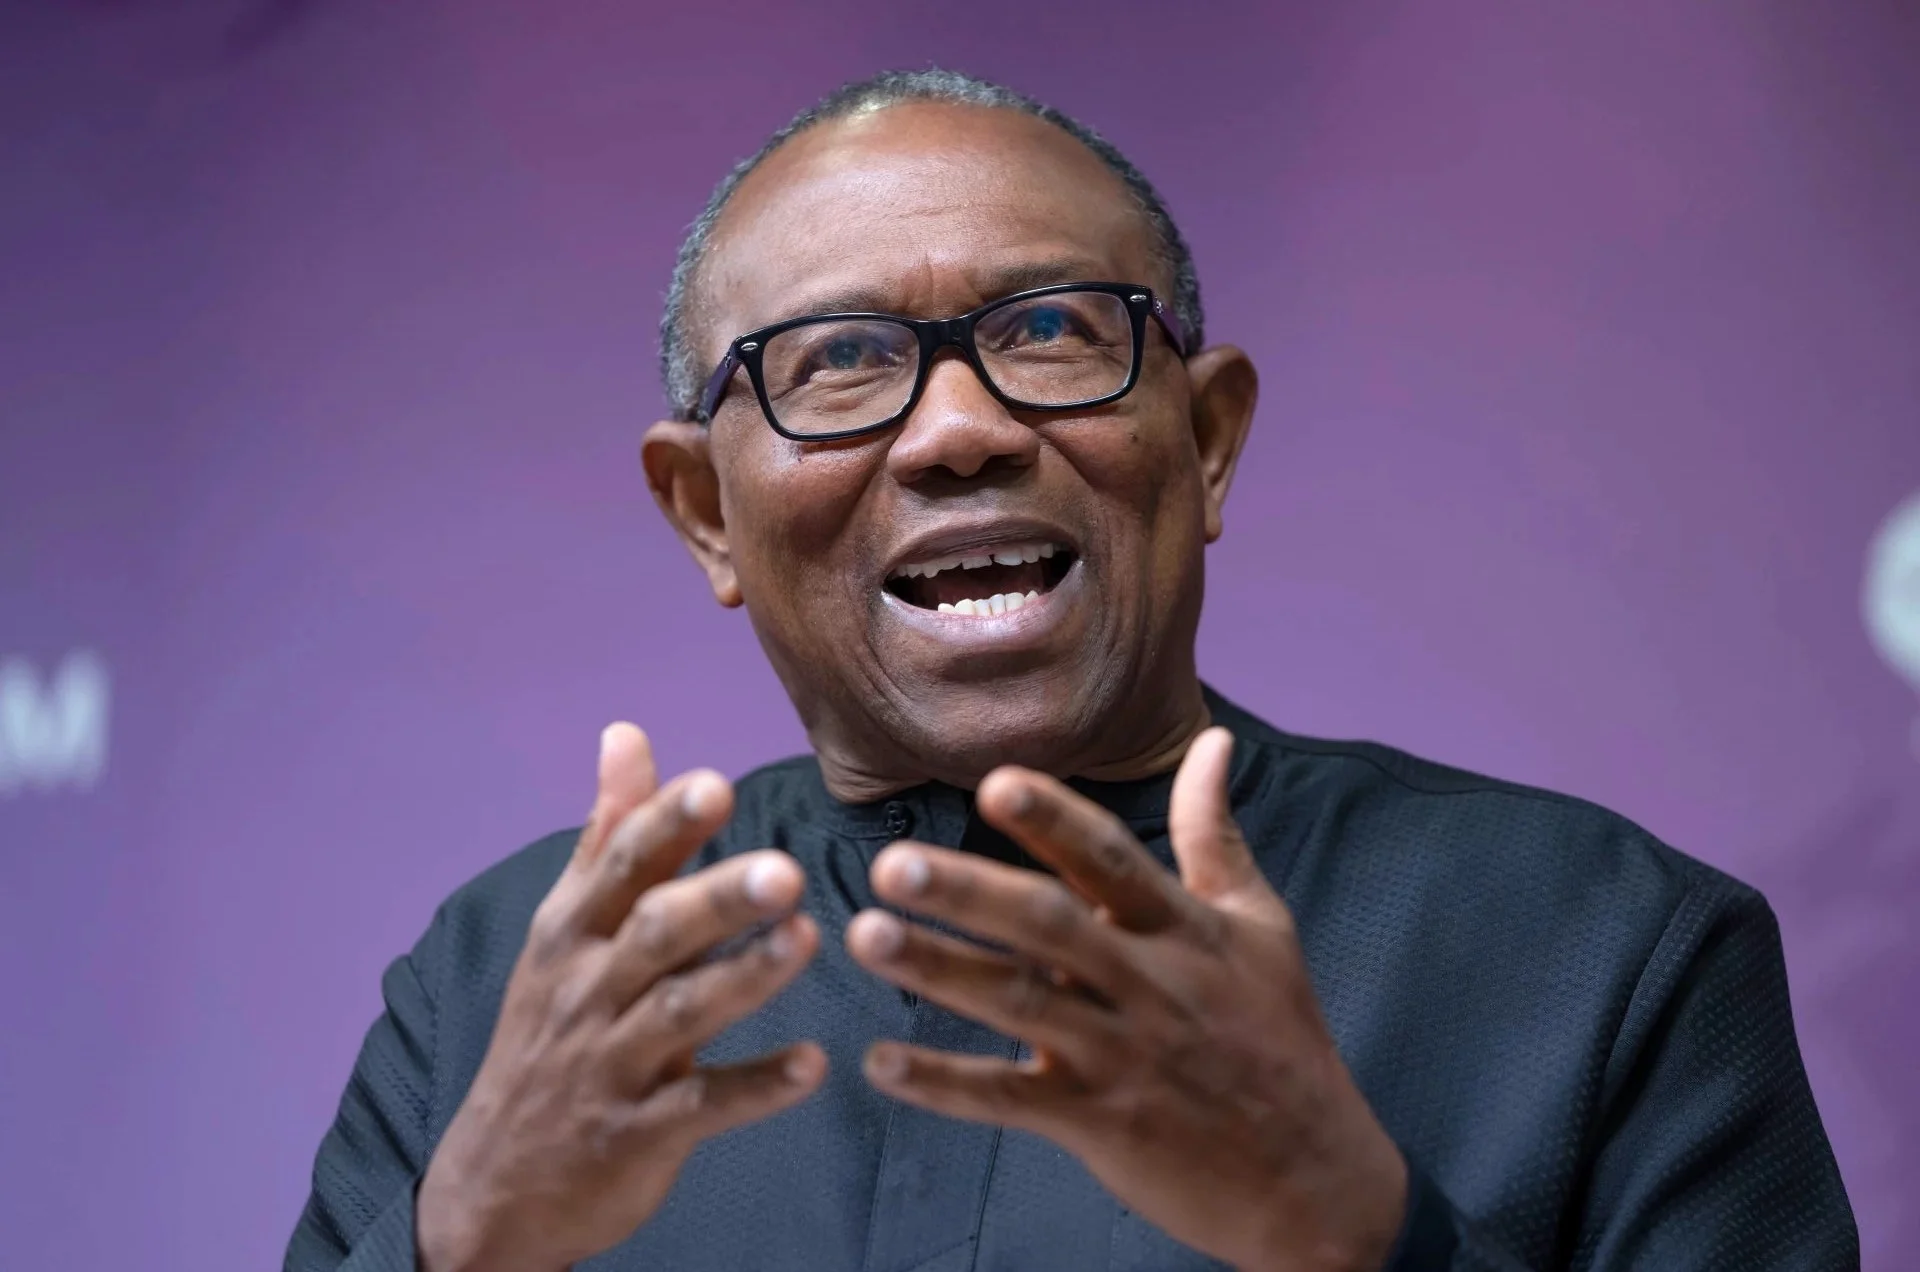 <article>
   Statement by Peter Obi on Government Agencies’ Actions